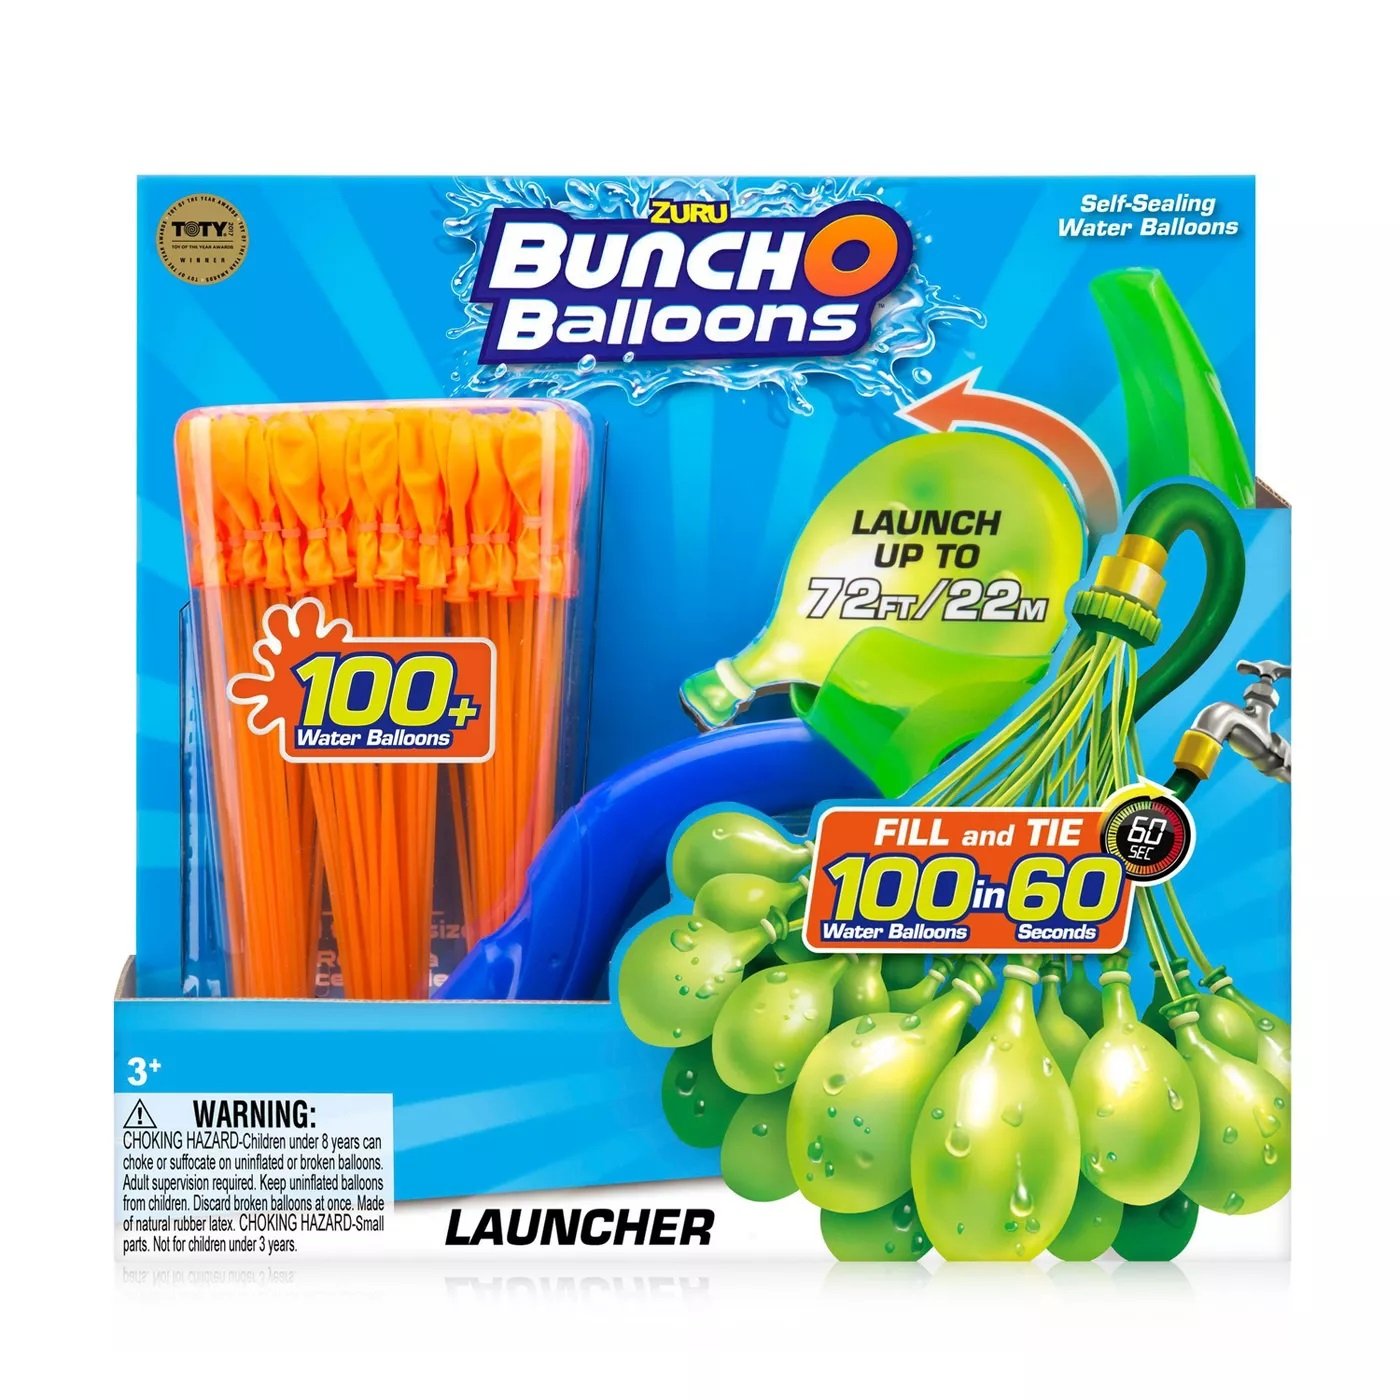 Bunch O Balloons pack -